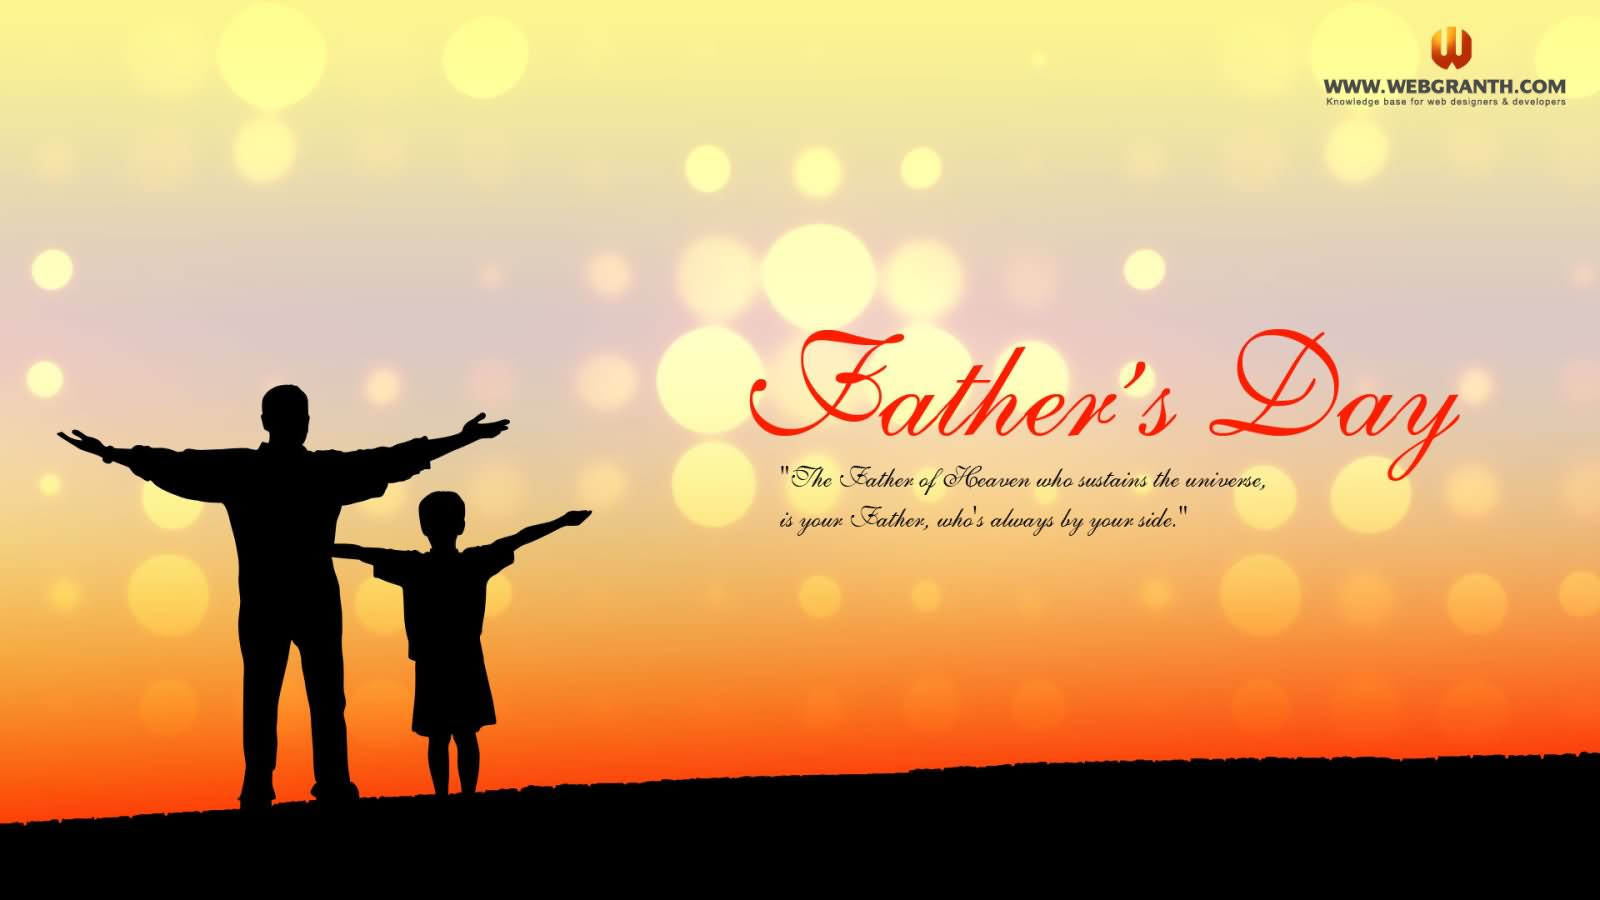 Fathers Day Quote Images
 31 Beautiful Father’s Day Wish And s